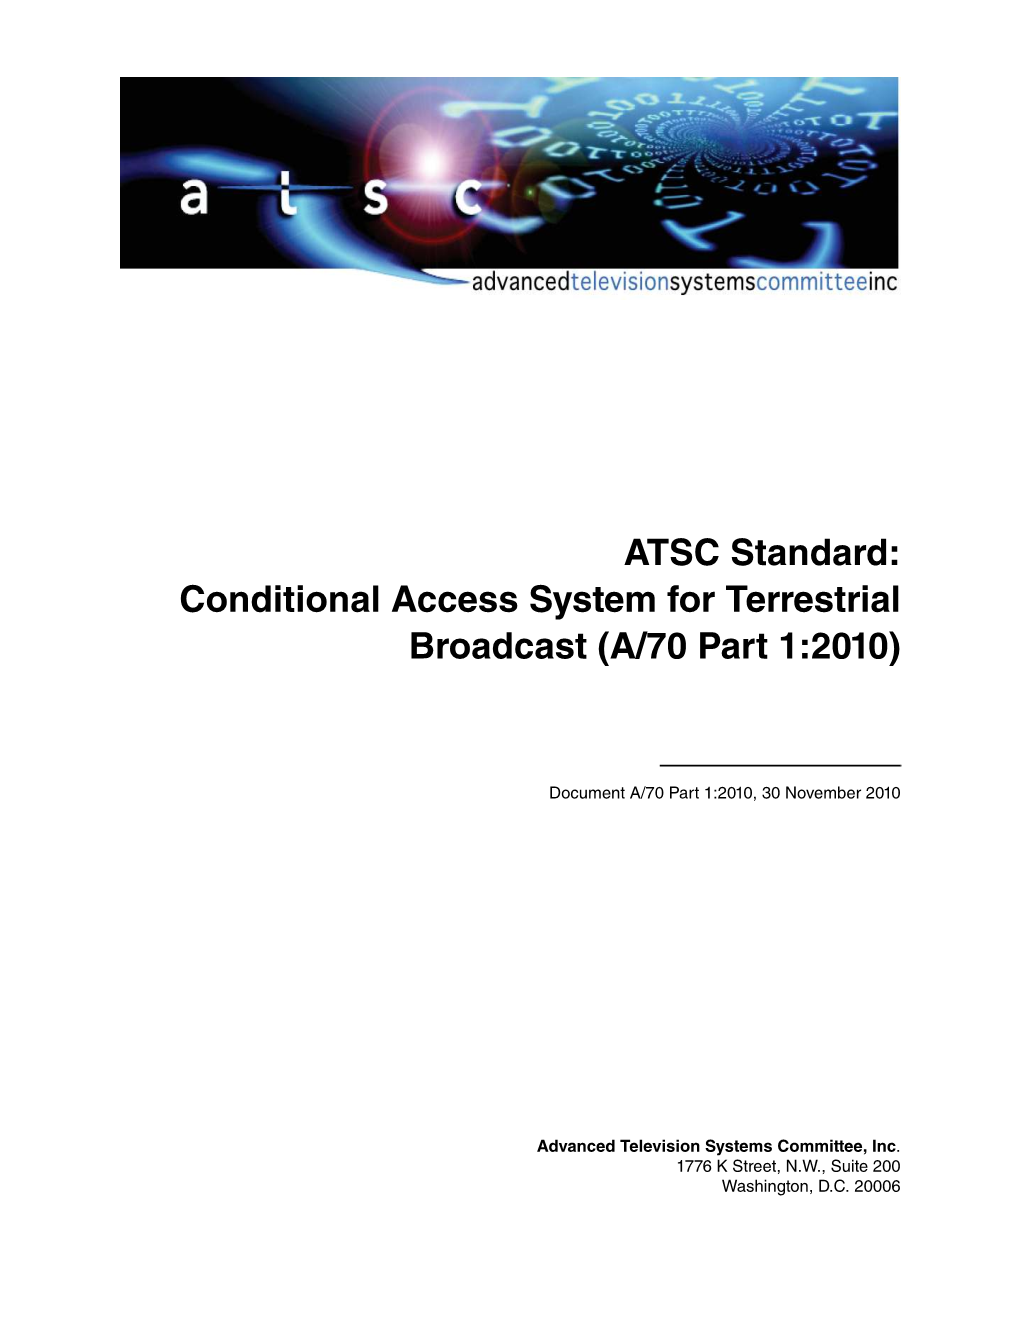 Conditional Access System for Terrestrial Broadcast (A/70 Part 1:2010)